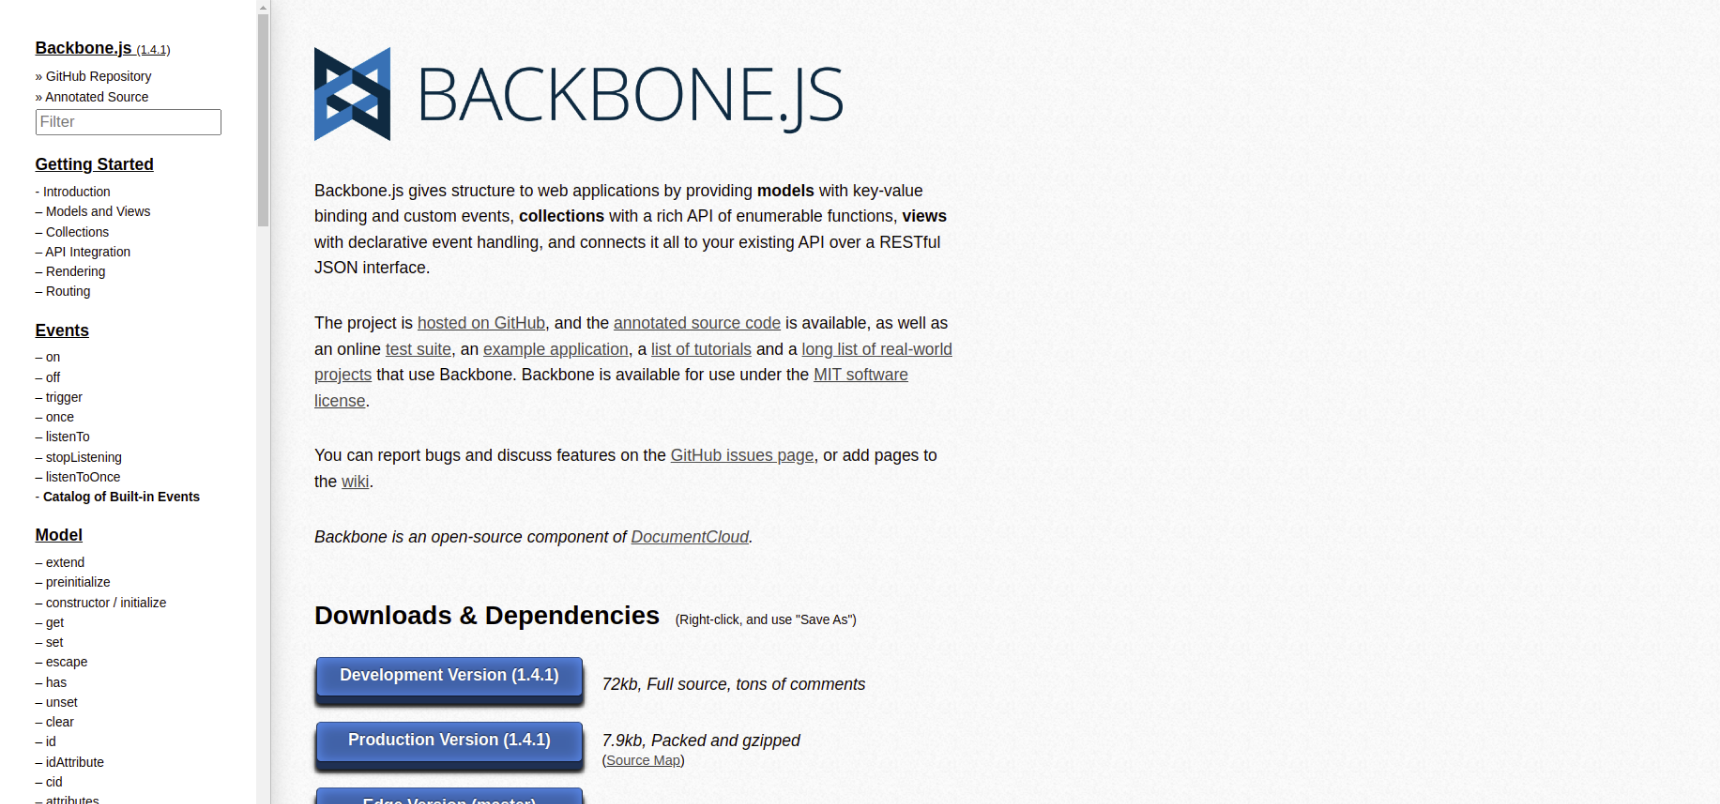 BackboneJS is a JavaScript library that gives structure to web applications. It’s an open-source library that was first released in October 2010. BackboneJS is used by many popular websites, including Uber, Pinterest, Reddit, and more.